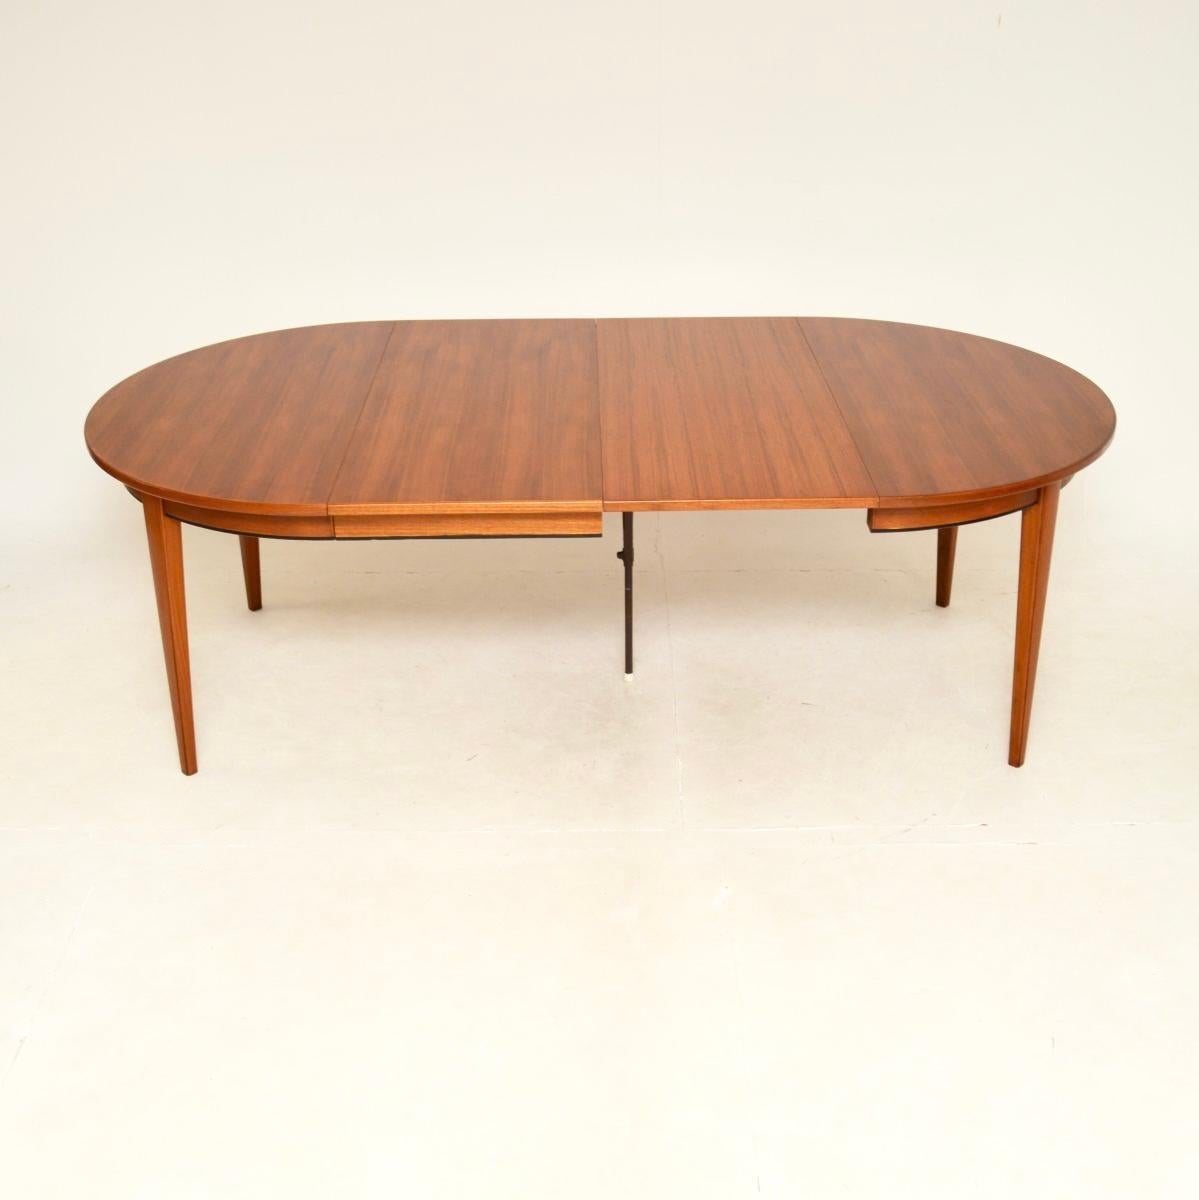 A stunning Danish vintage teak extending dining table by Gunni Omann. It was manufactured by Omann Jr, it dates from the 1960’s.

This is of superb quality, it is extremely stylish and very practical. It has two additional leaves, it extends from a